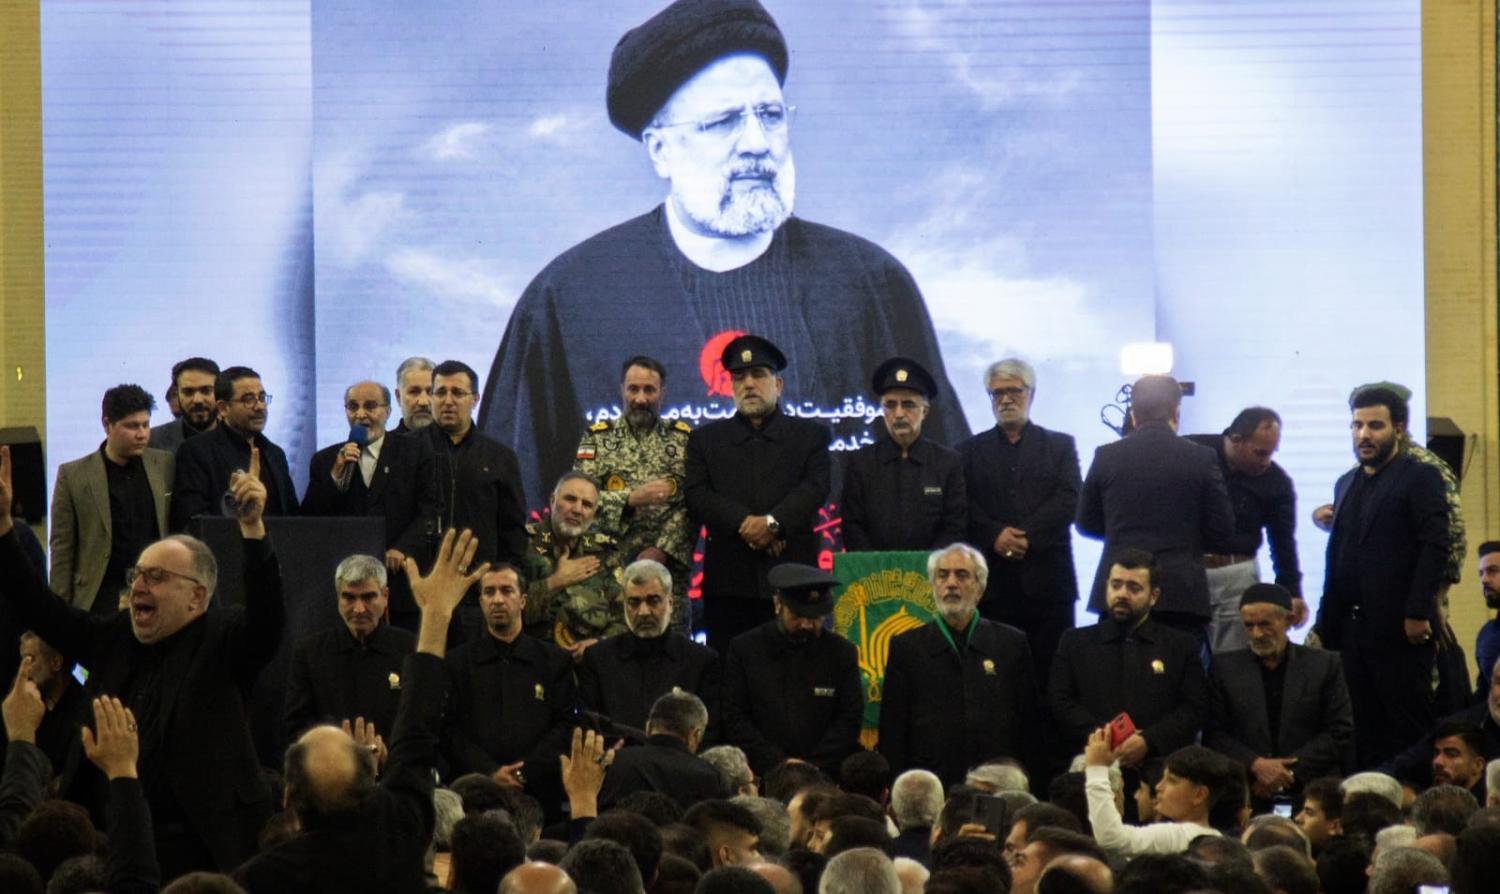 Mourning ceremonies organised in Tabriz following the death of Iranian President Ebrahim Raisi and senior officials in a helicopter crash on 19 May (Amirhossein Nami/Anadolu via Getty Images)